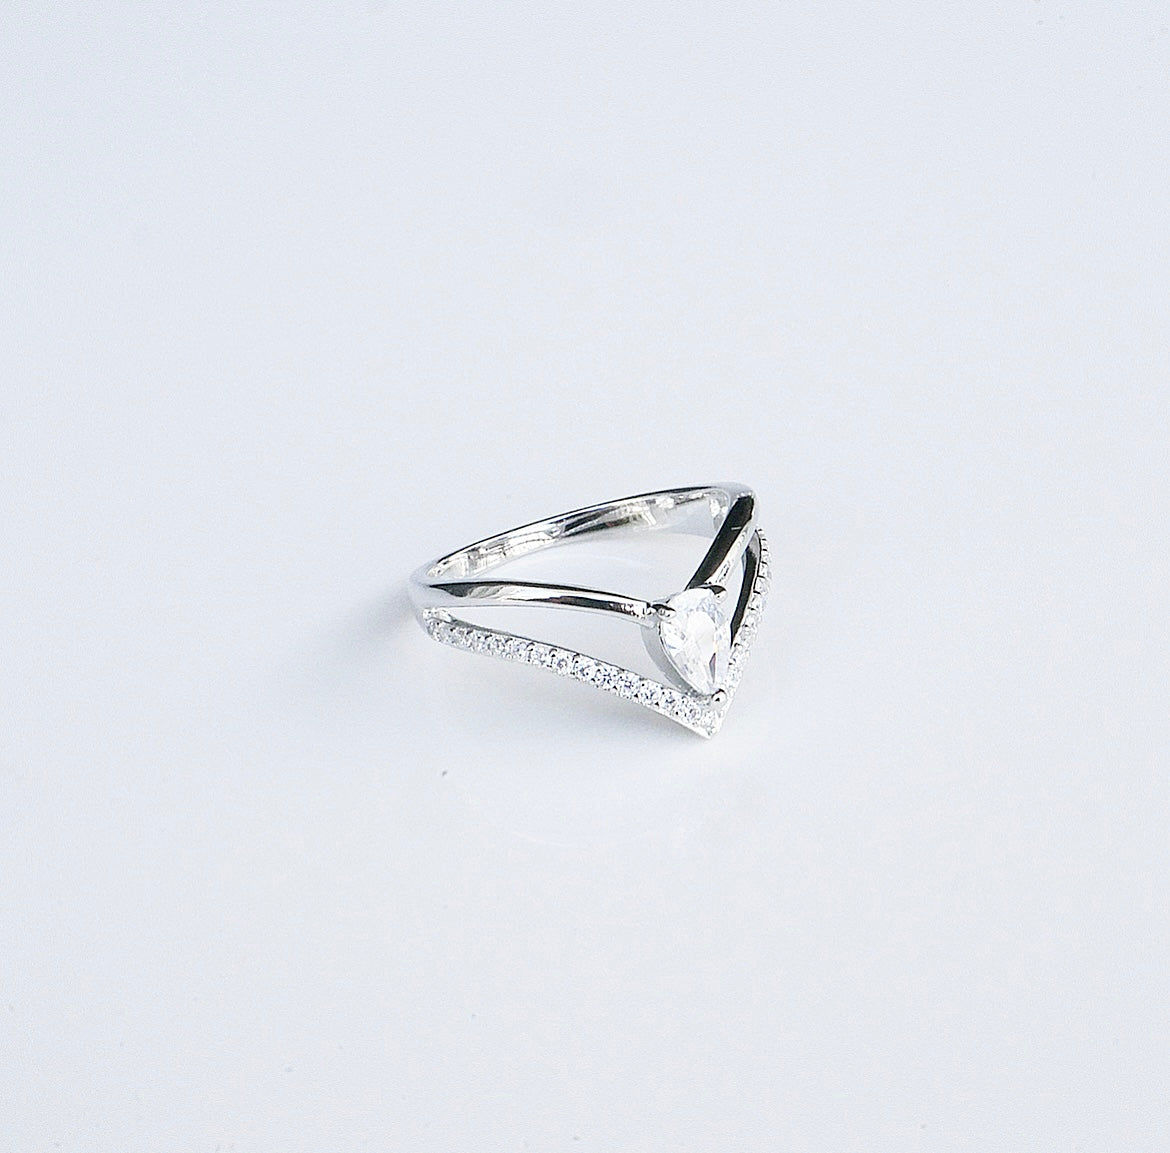 triangle ring sterling silver, chevron triangle ring with cz diamonds, diamond triangle ring sterling silver, shopping in Miami, jewelry store in Brickell, cute rings, rings in sterling silver, diamond sterling silve